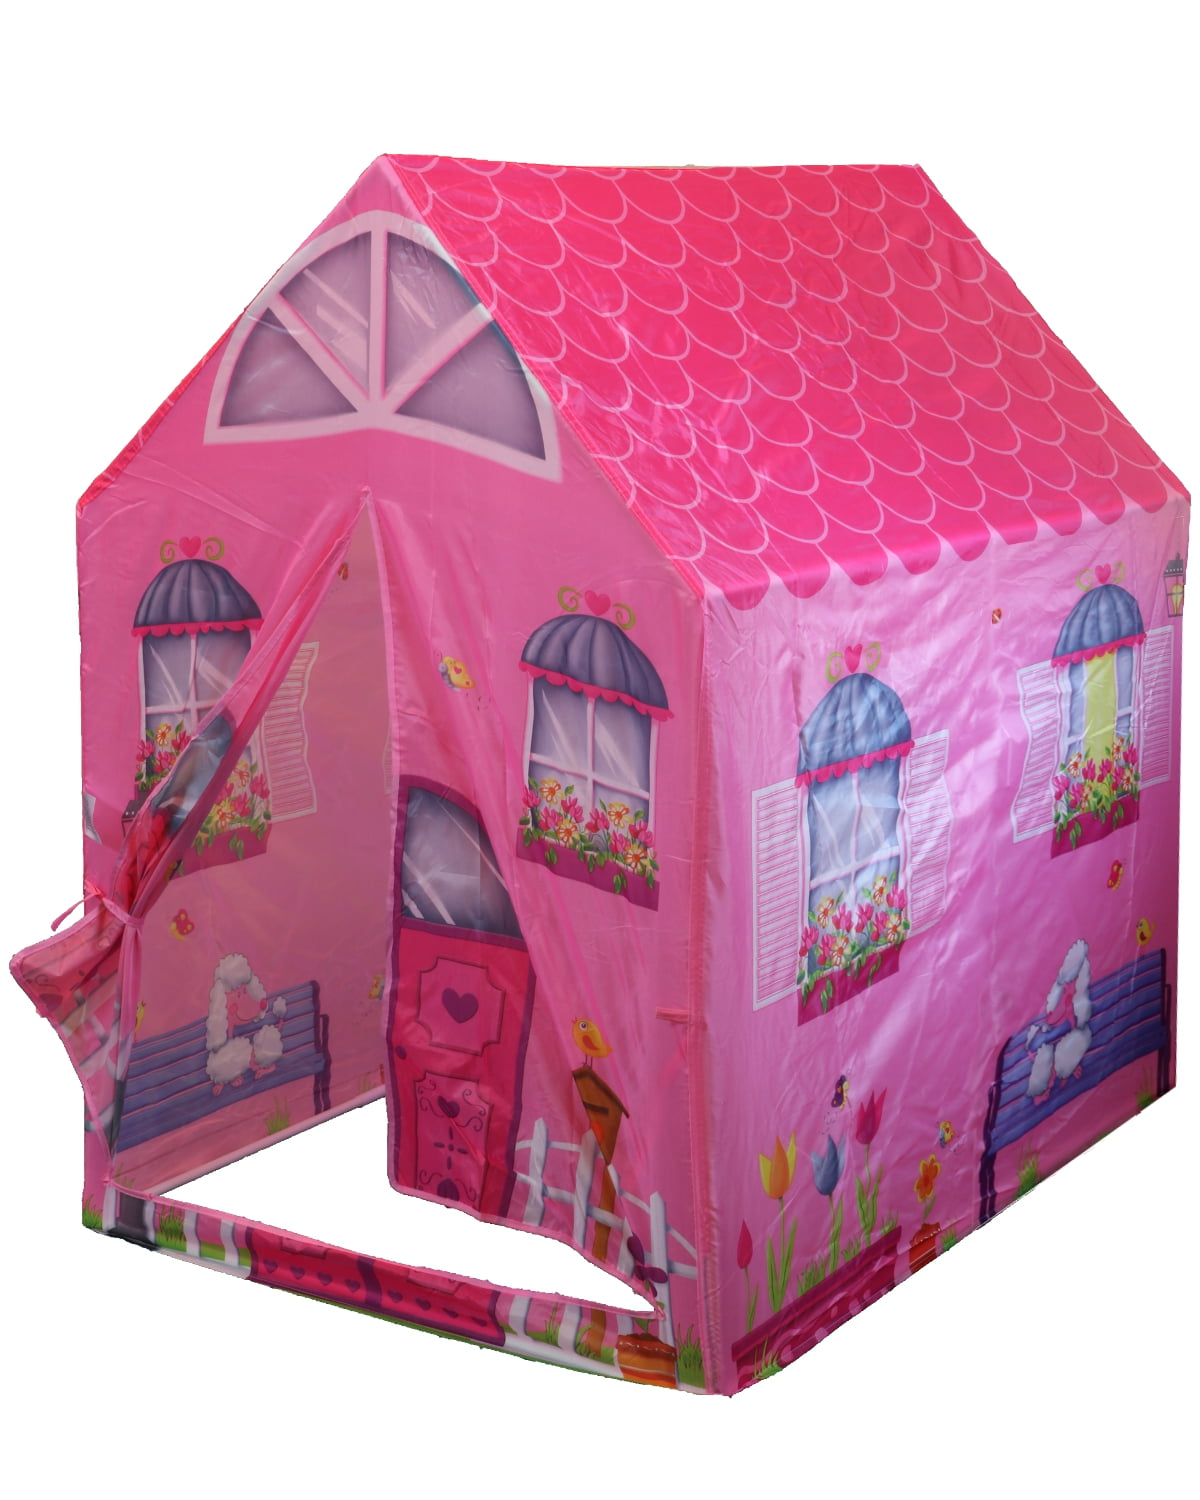 POCO DIVO Princess Castle Girls Play House Indoor Pink Toy Tents Kids Outdoor Playhouse 